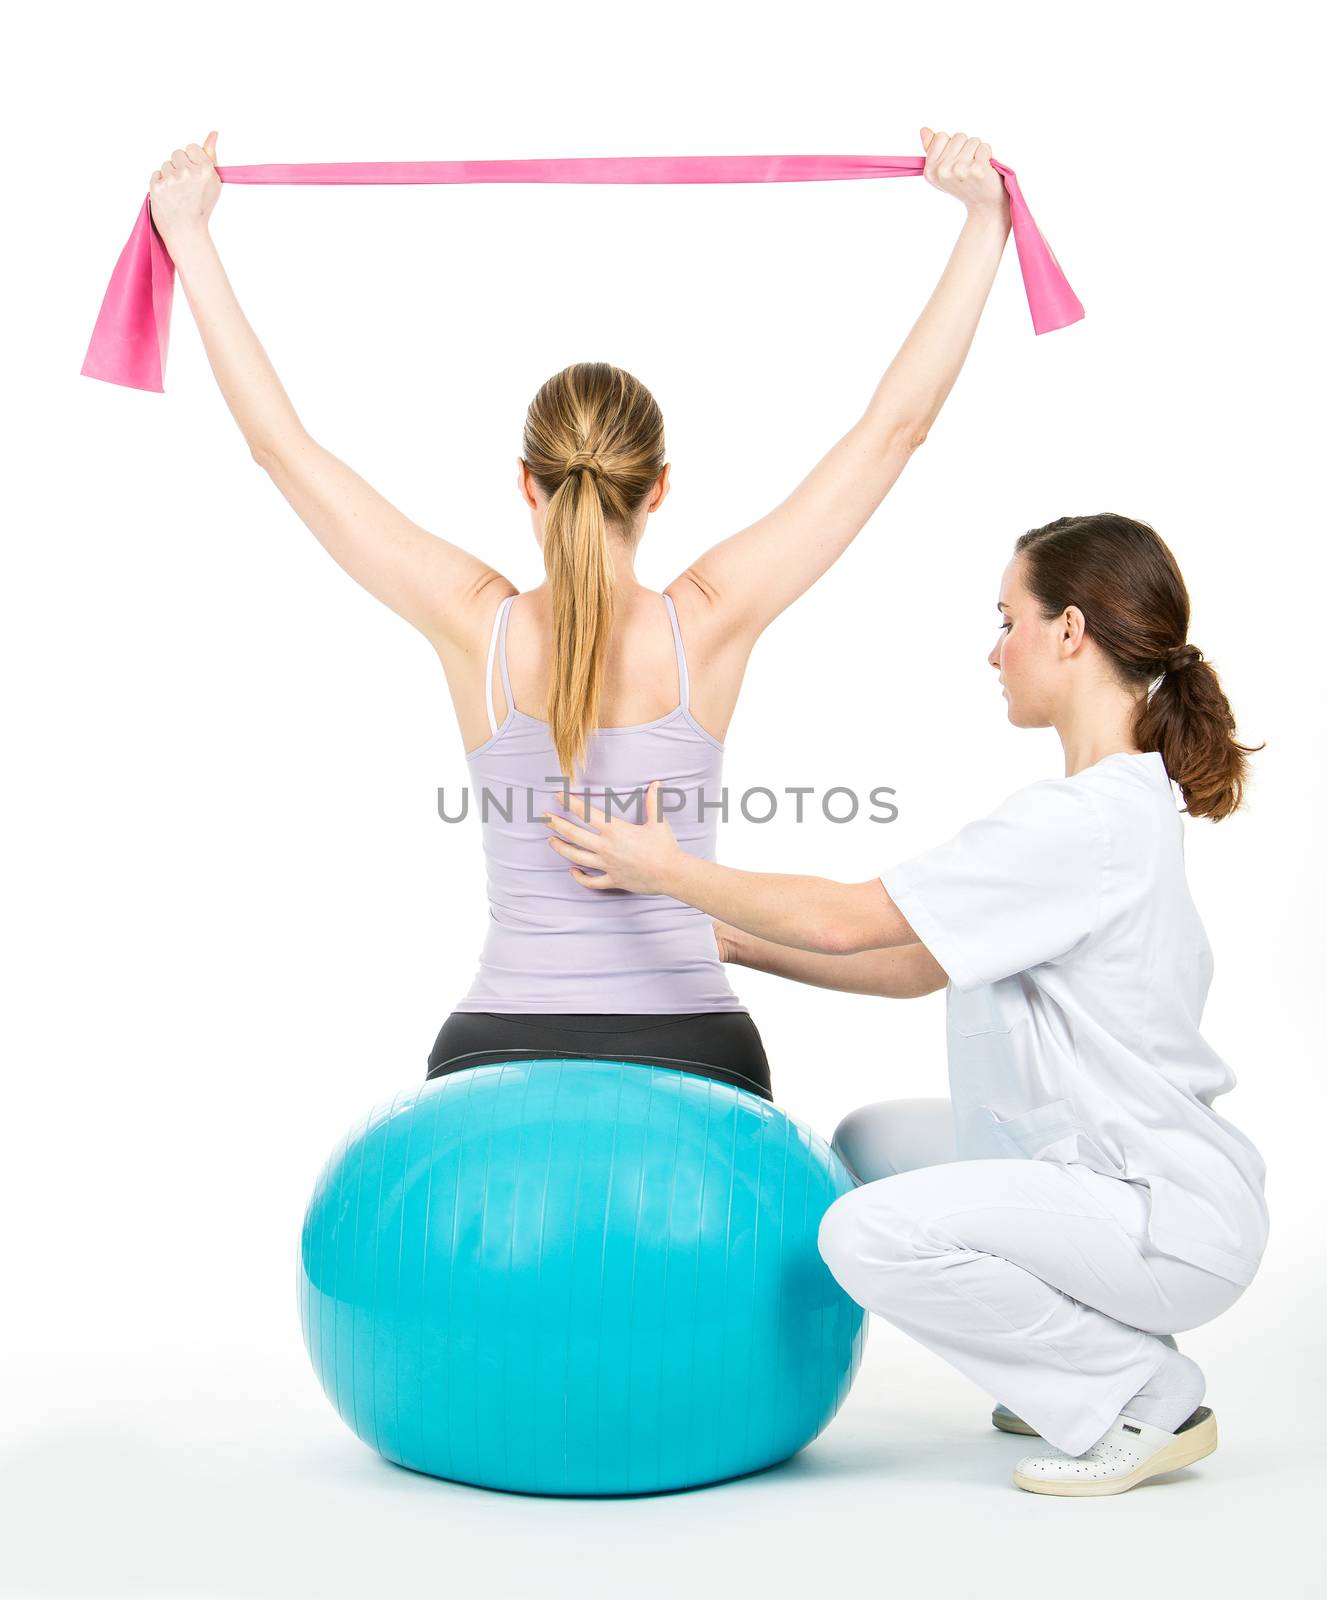 doctor with medical ball and woman patient